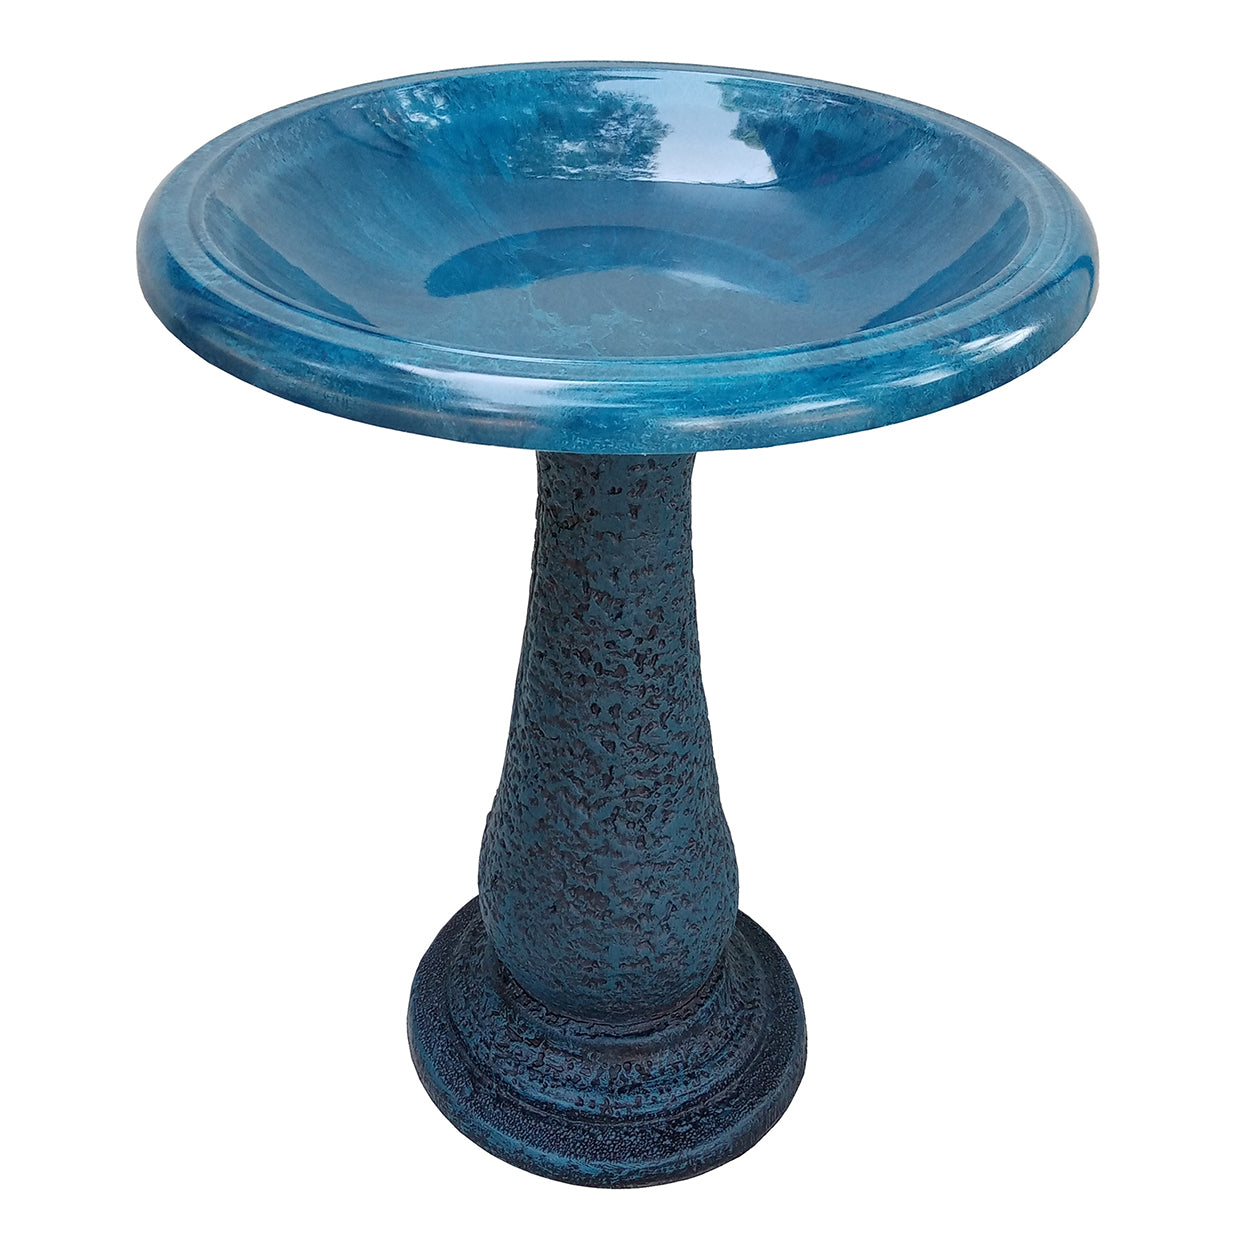 24" Azure Fiber Clay Birdbath. Made of 70% clay, 25% plastic, and 5% fiber. Impact and shatter-resistant. UV protection. 19"D x 24"H 21"H base, 8 lbs.